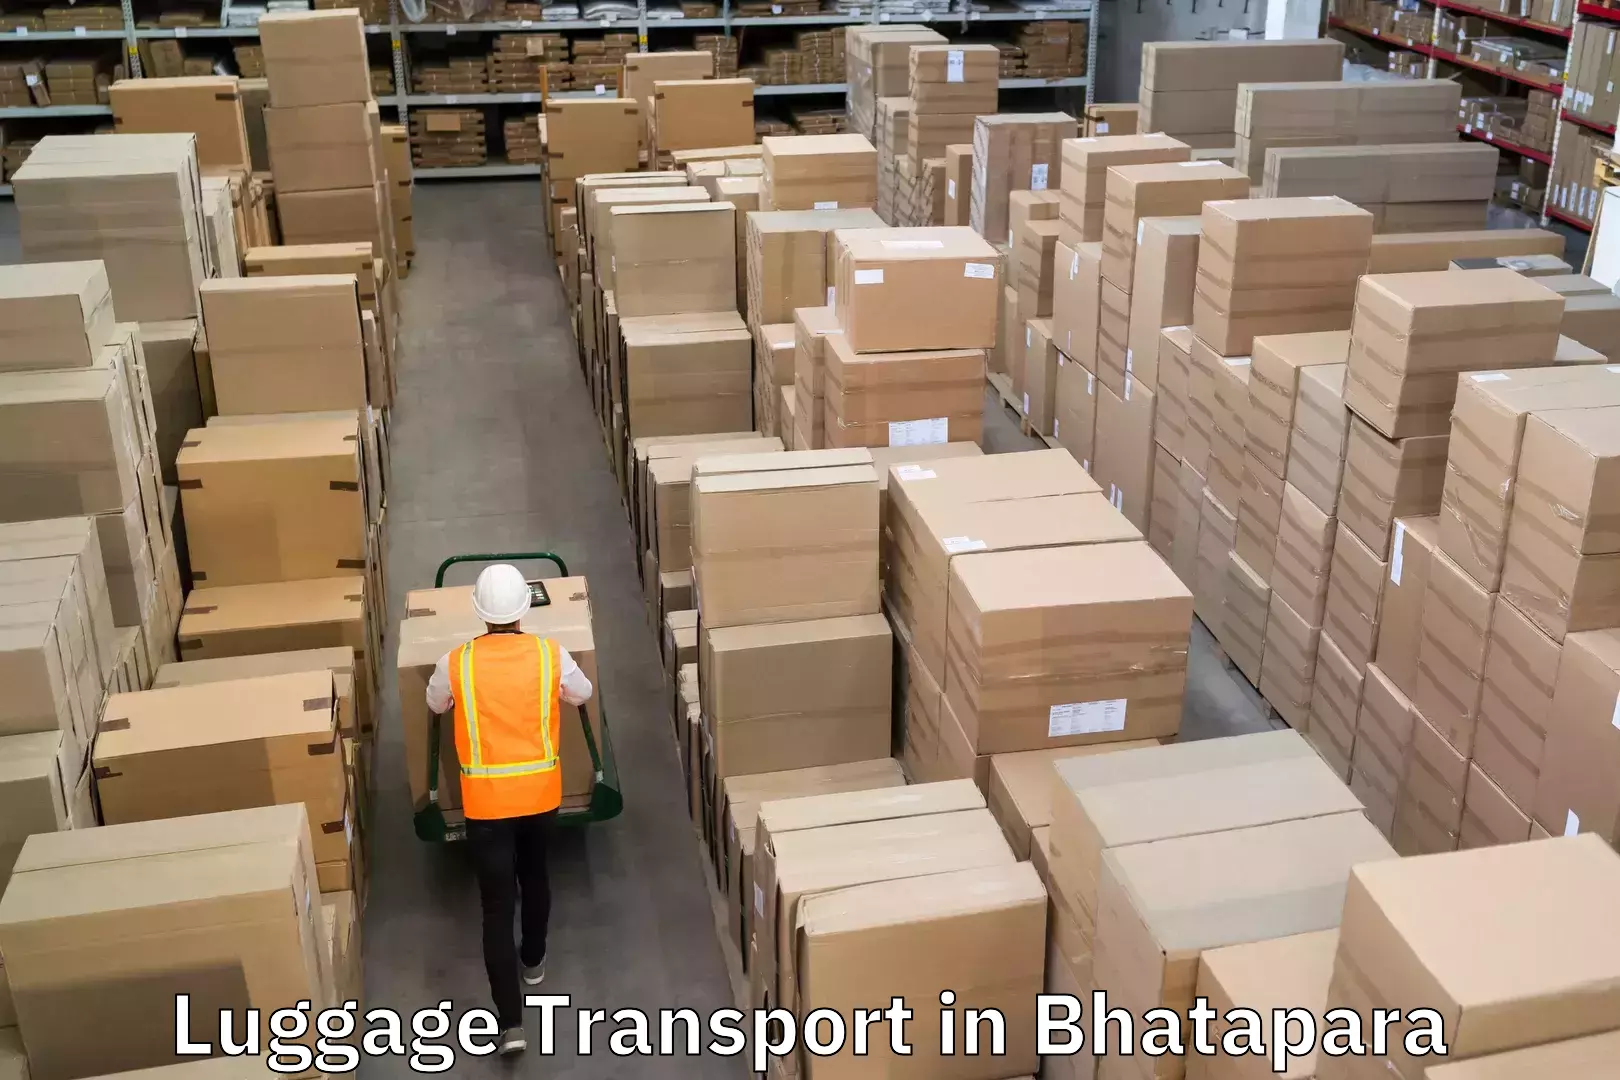 Express luggage delivery in Bhatapara